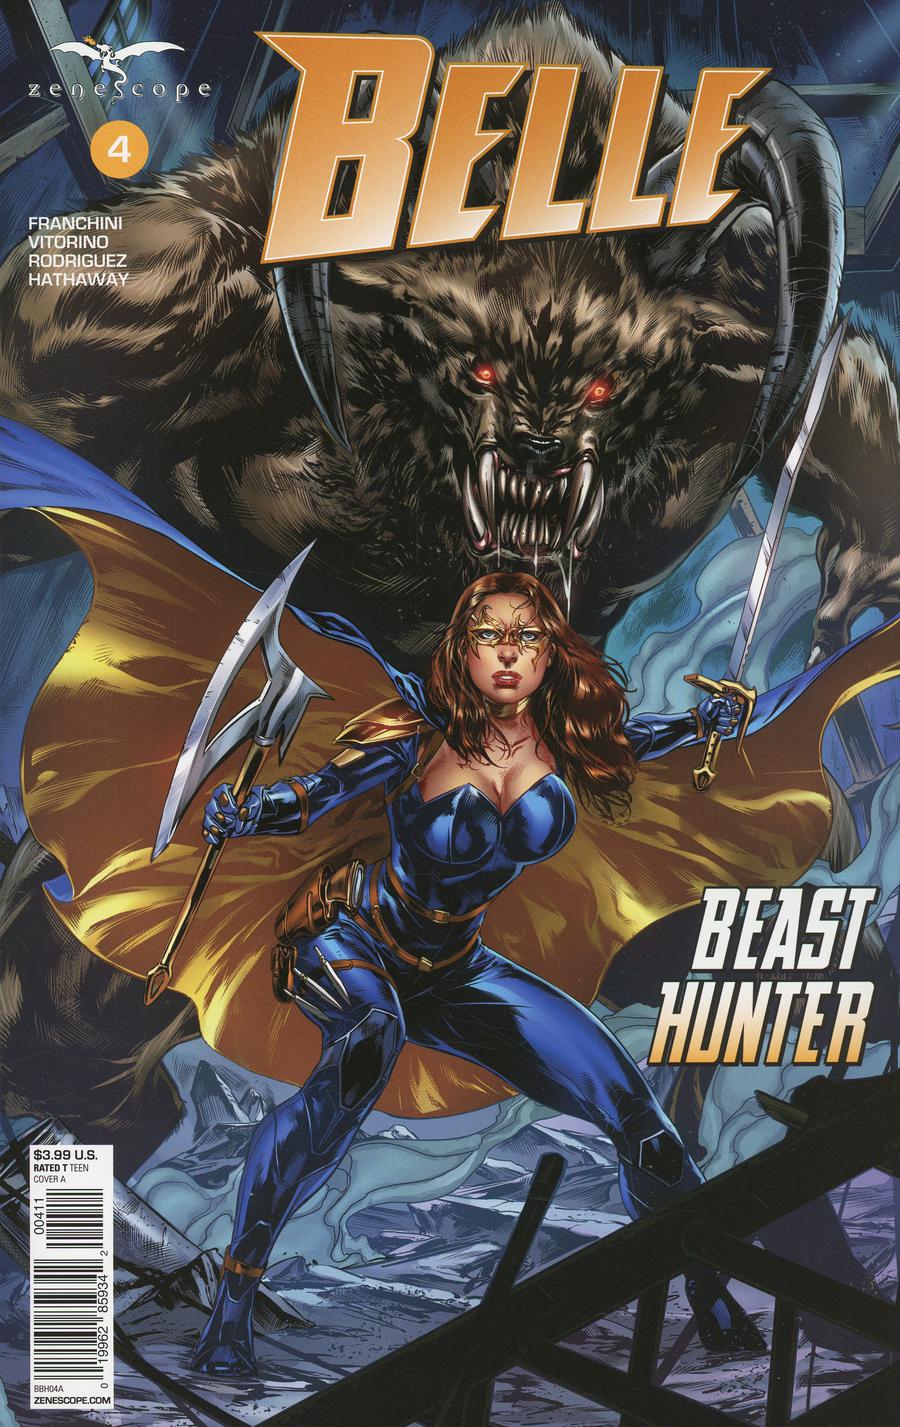 Grimm Fairy Tales Presents Belle Beast Hunter #4 Cover A Caanan White